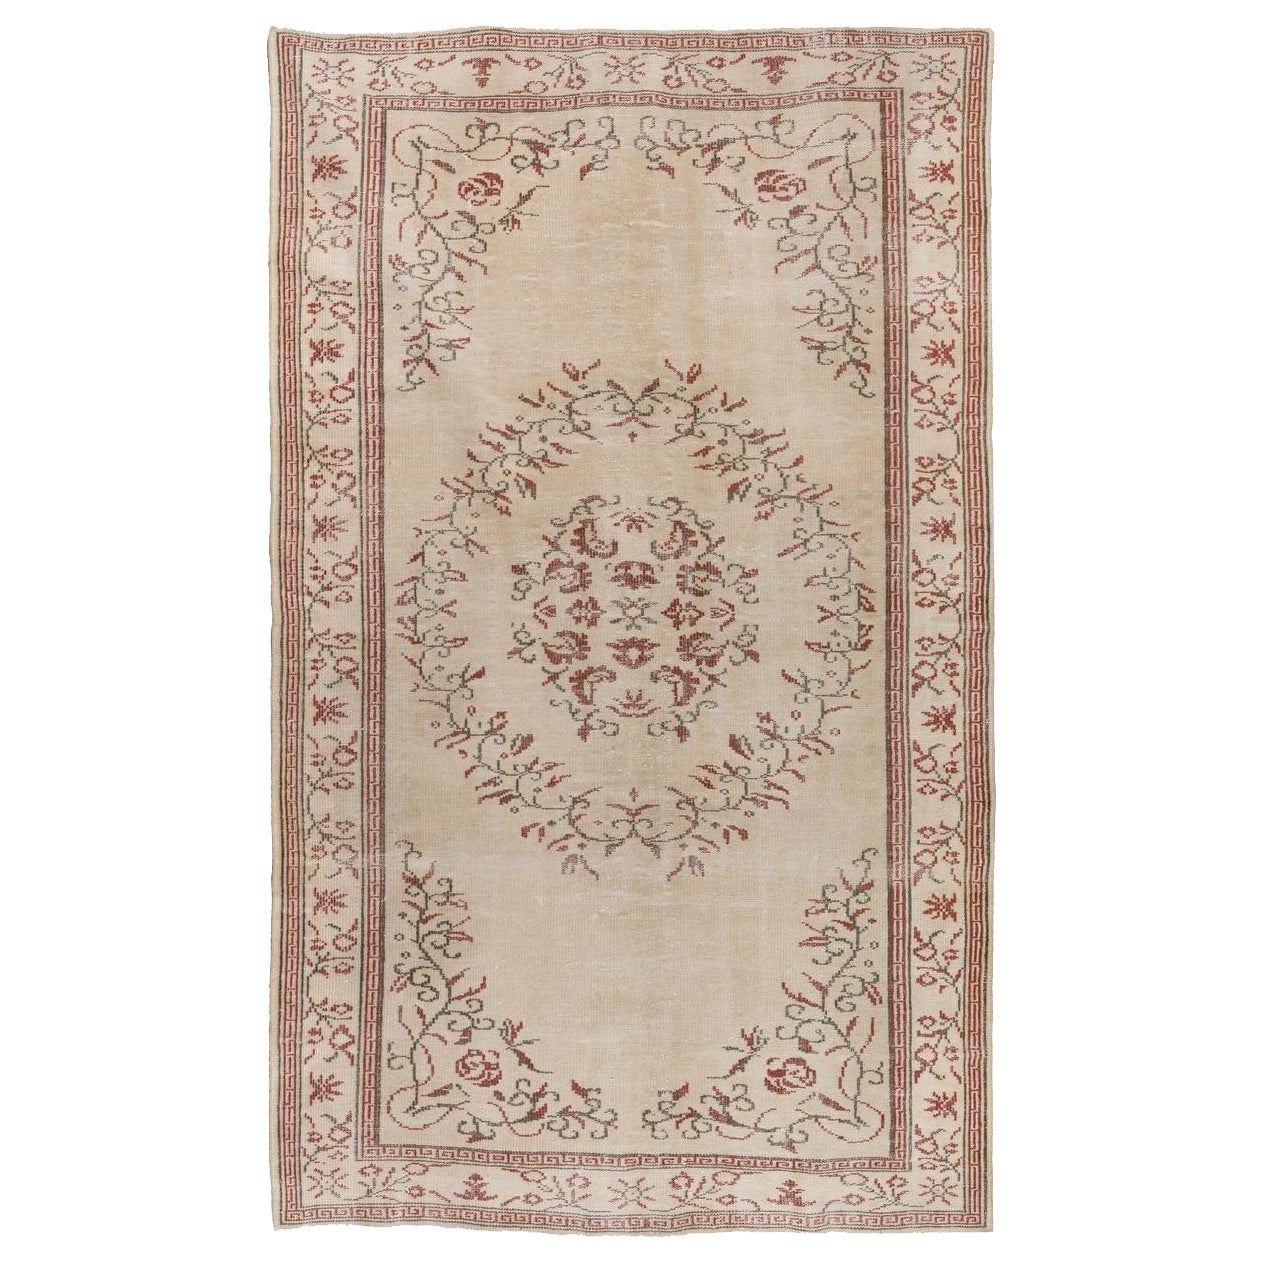 6x9.5 Ft Vintage Oushak Rug in Soft Colors, Ideal for Home & Office Decor